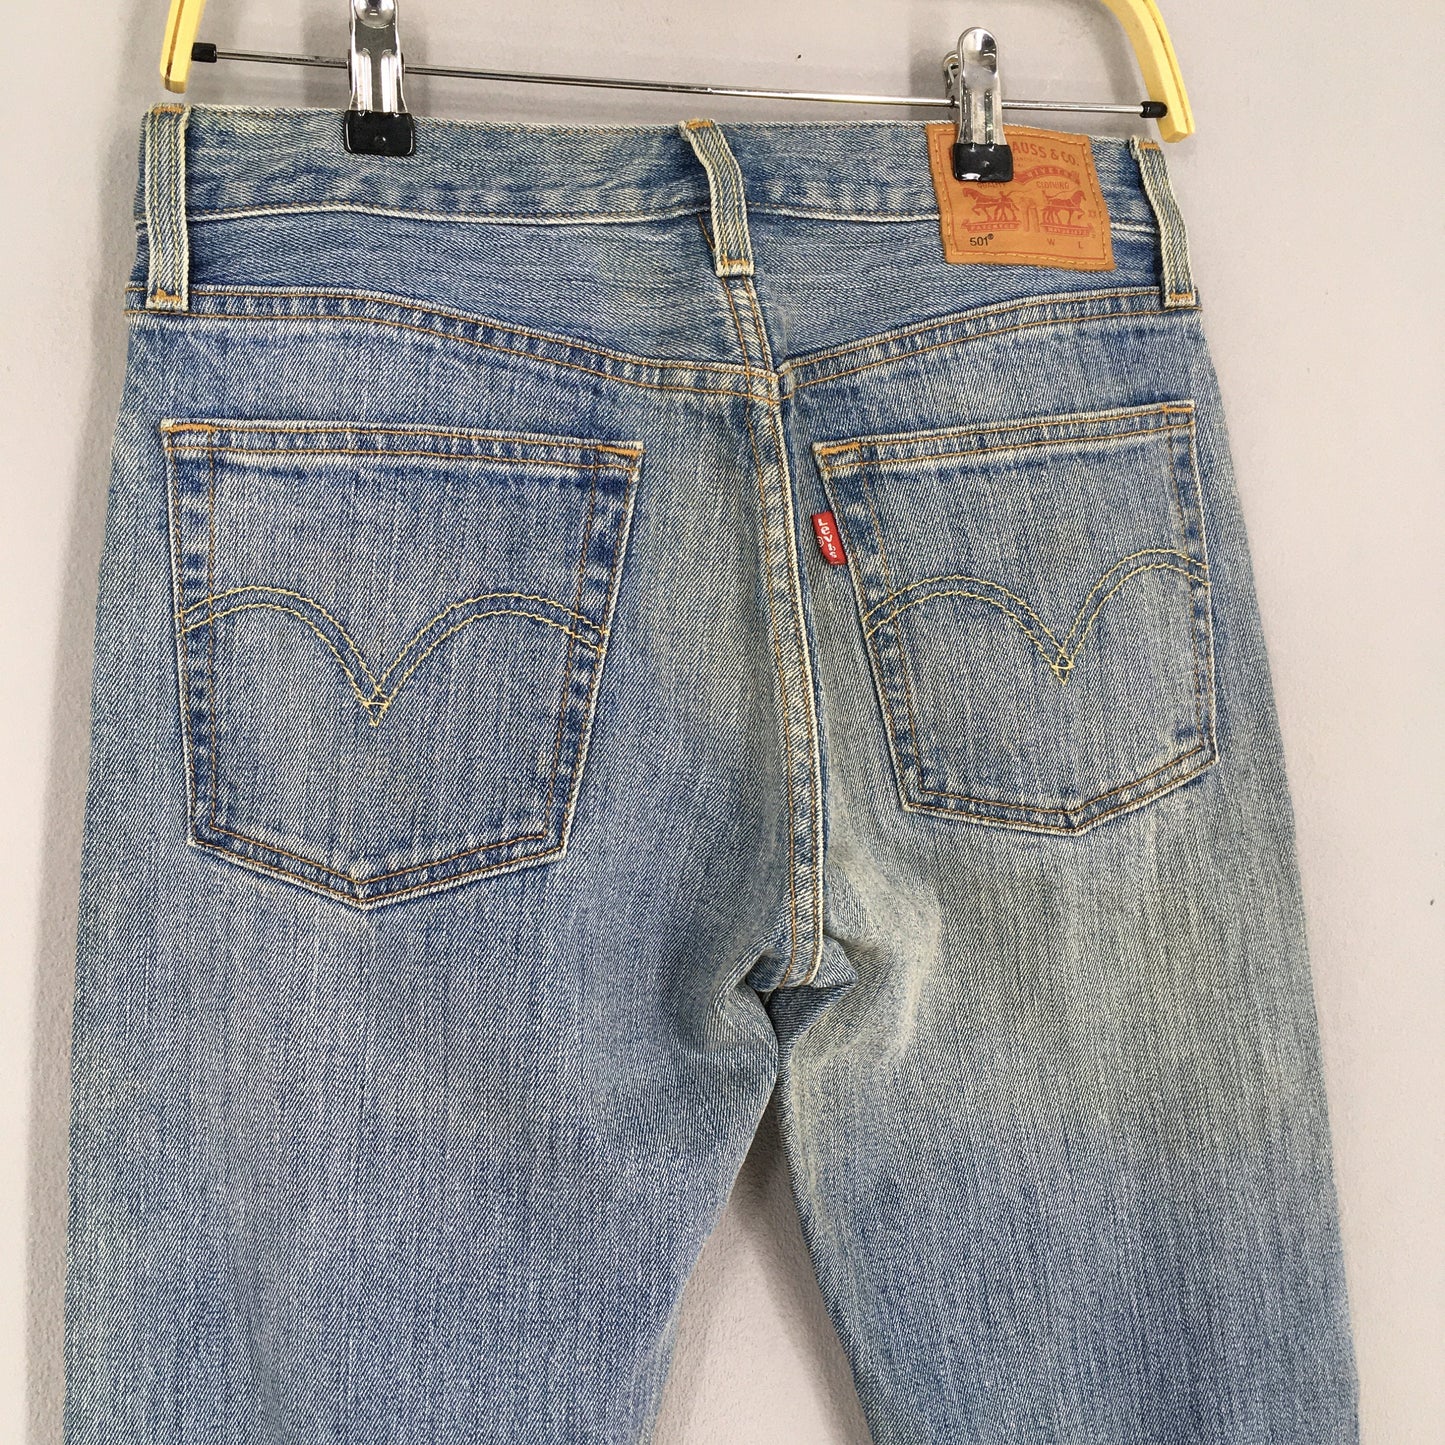 Levis 501 Faded Blue Jeans Size 28x28